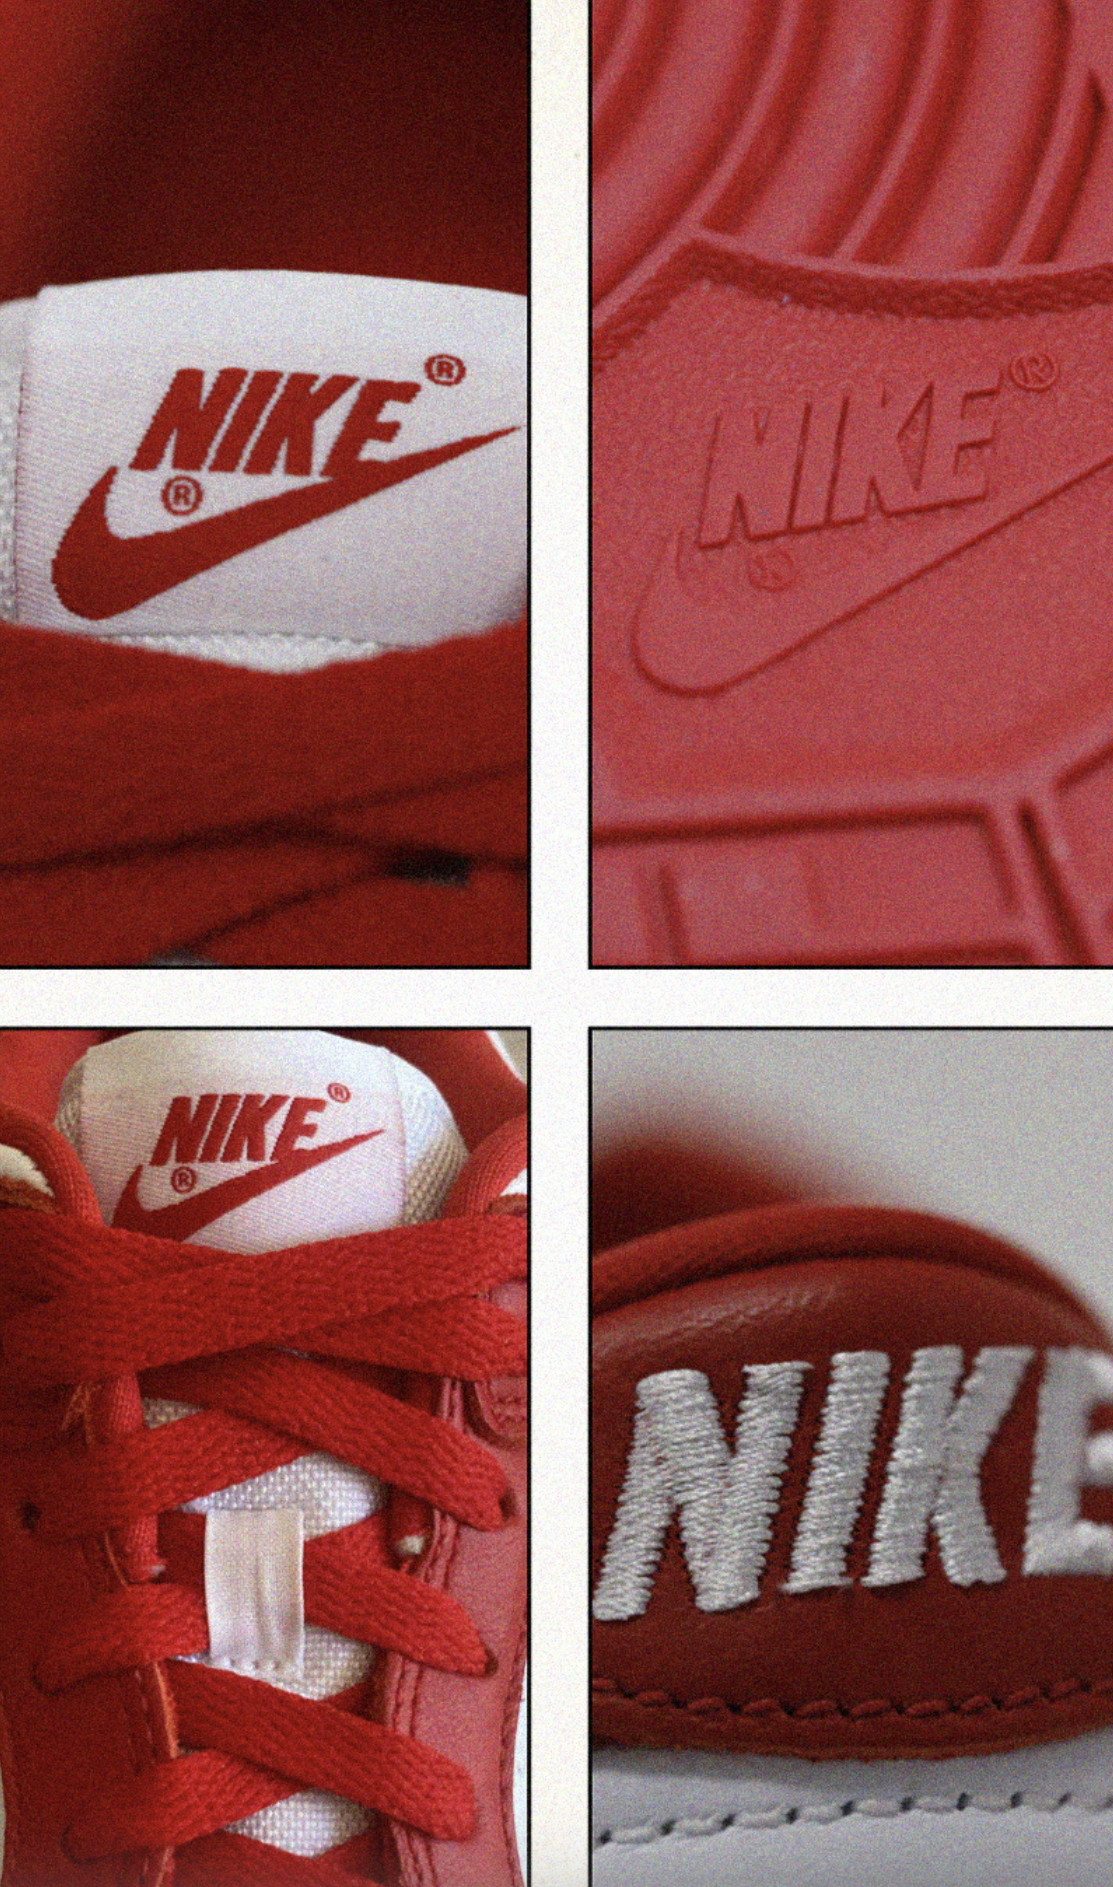 red low dunks